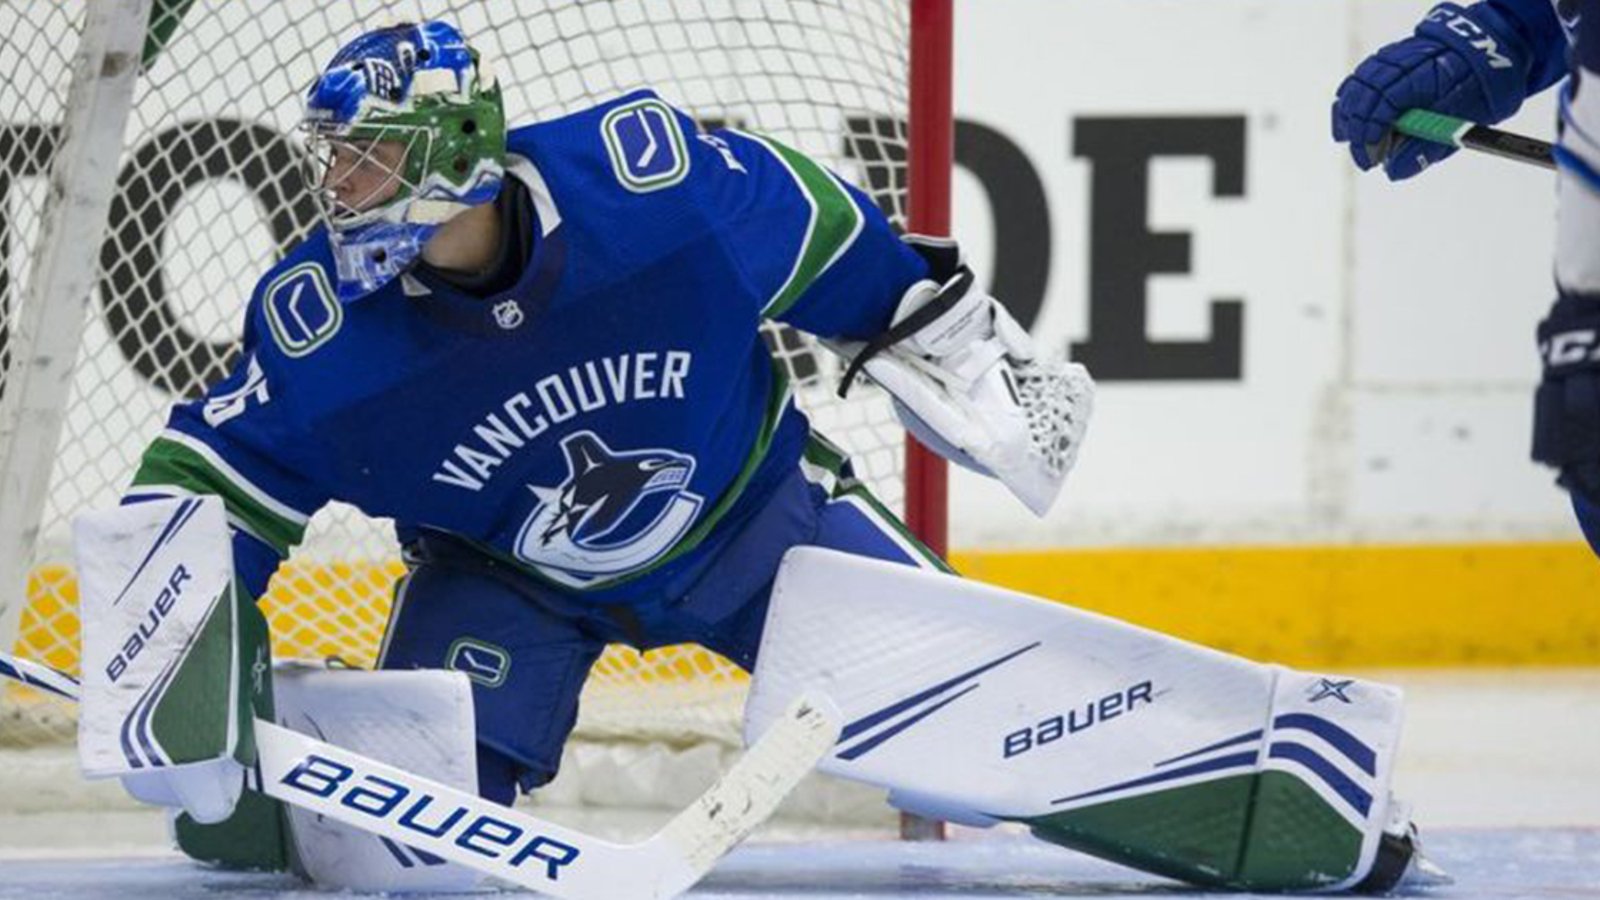 Breaking: Canucks prospect and Team Canada starting goalie DiPietro has been traded